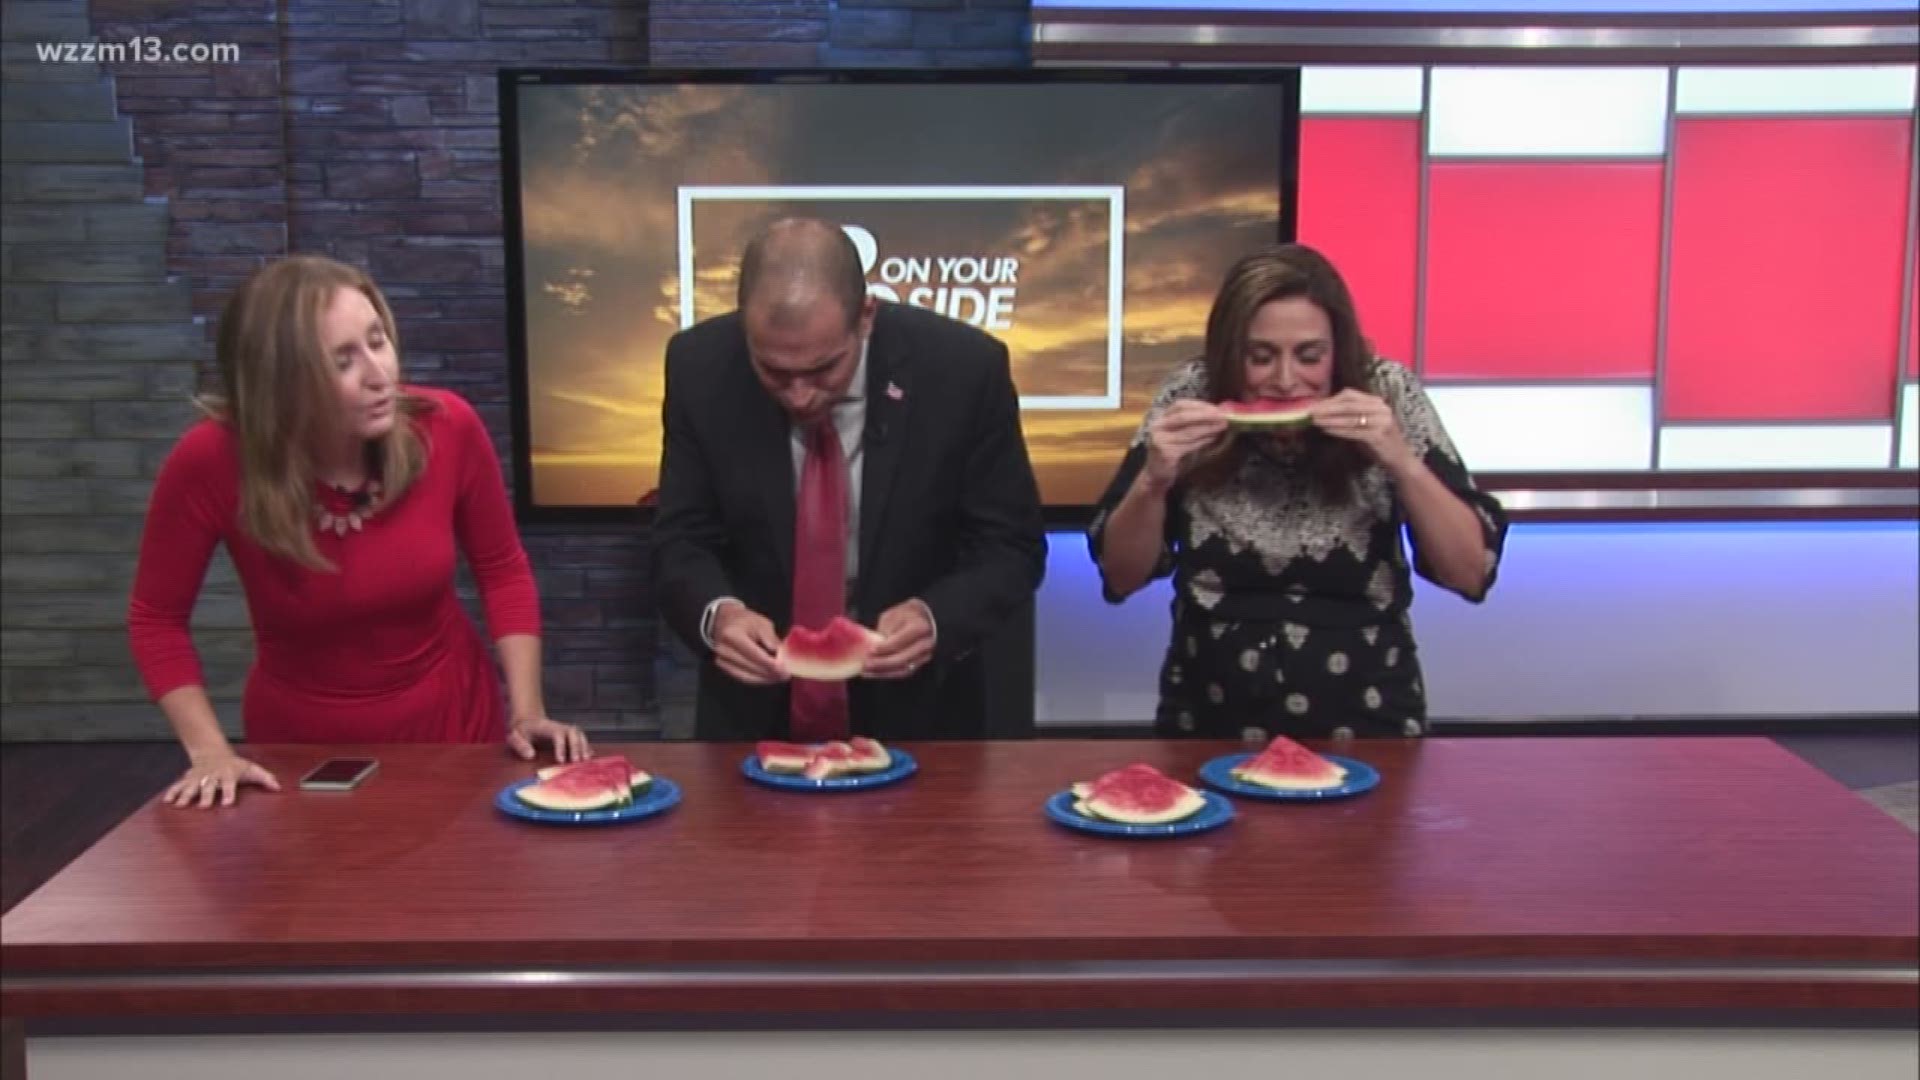 Watermelon-eating contest on the 13 Morning Show